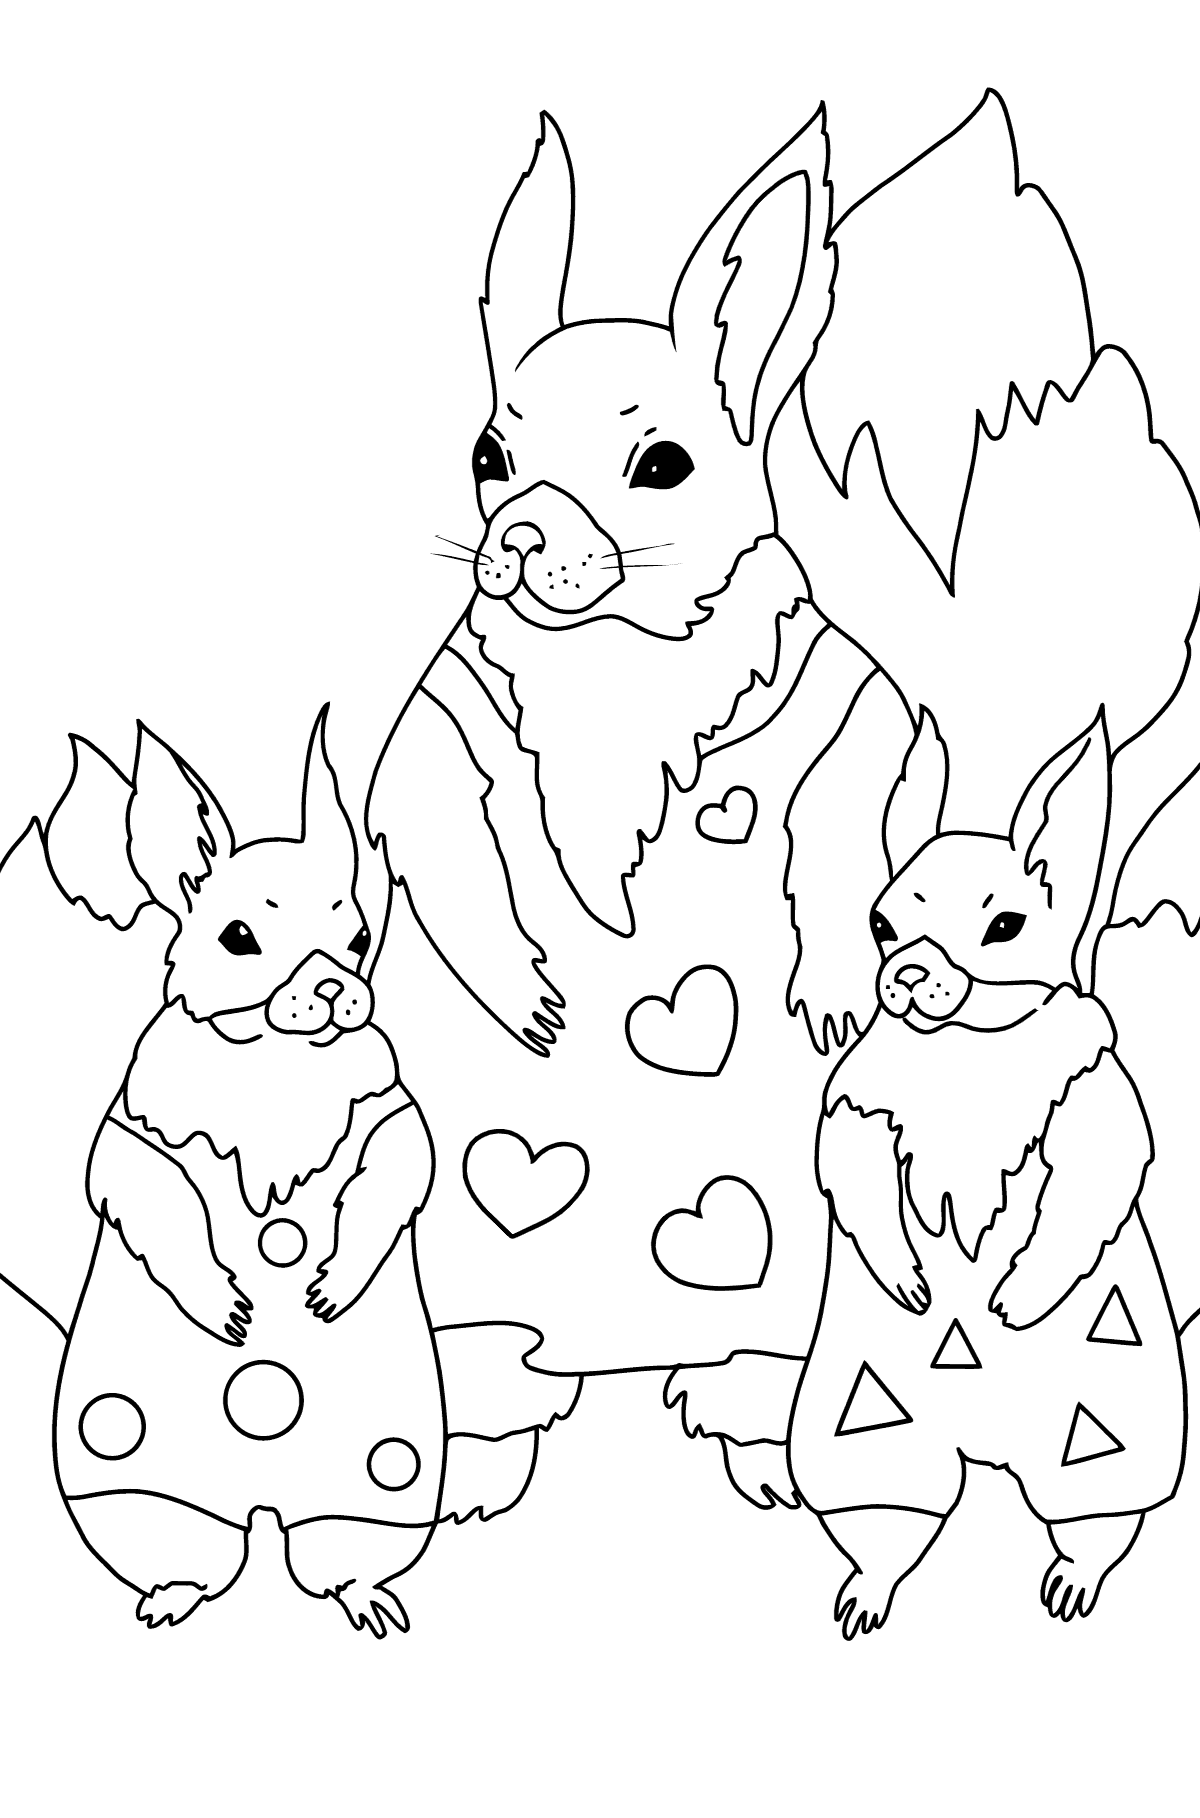 Spring Coloring Page - Squirrels have Dressed Up - Coloring Pages for Children